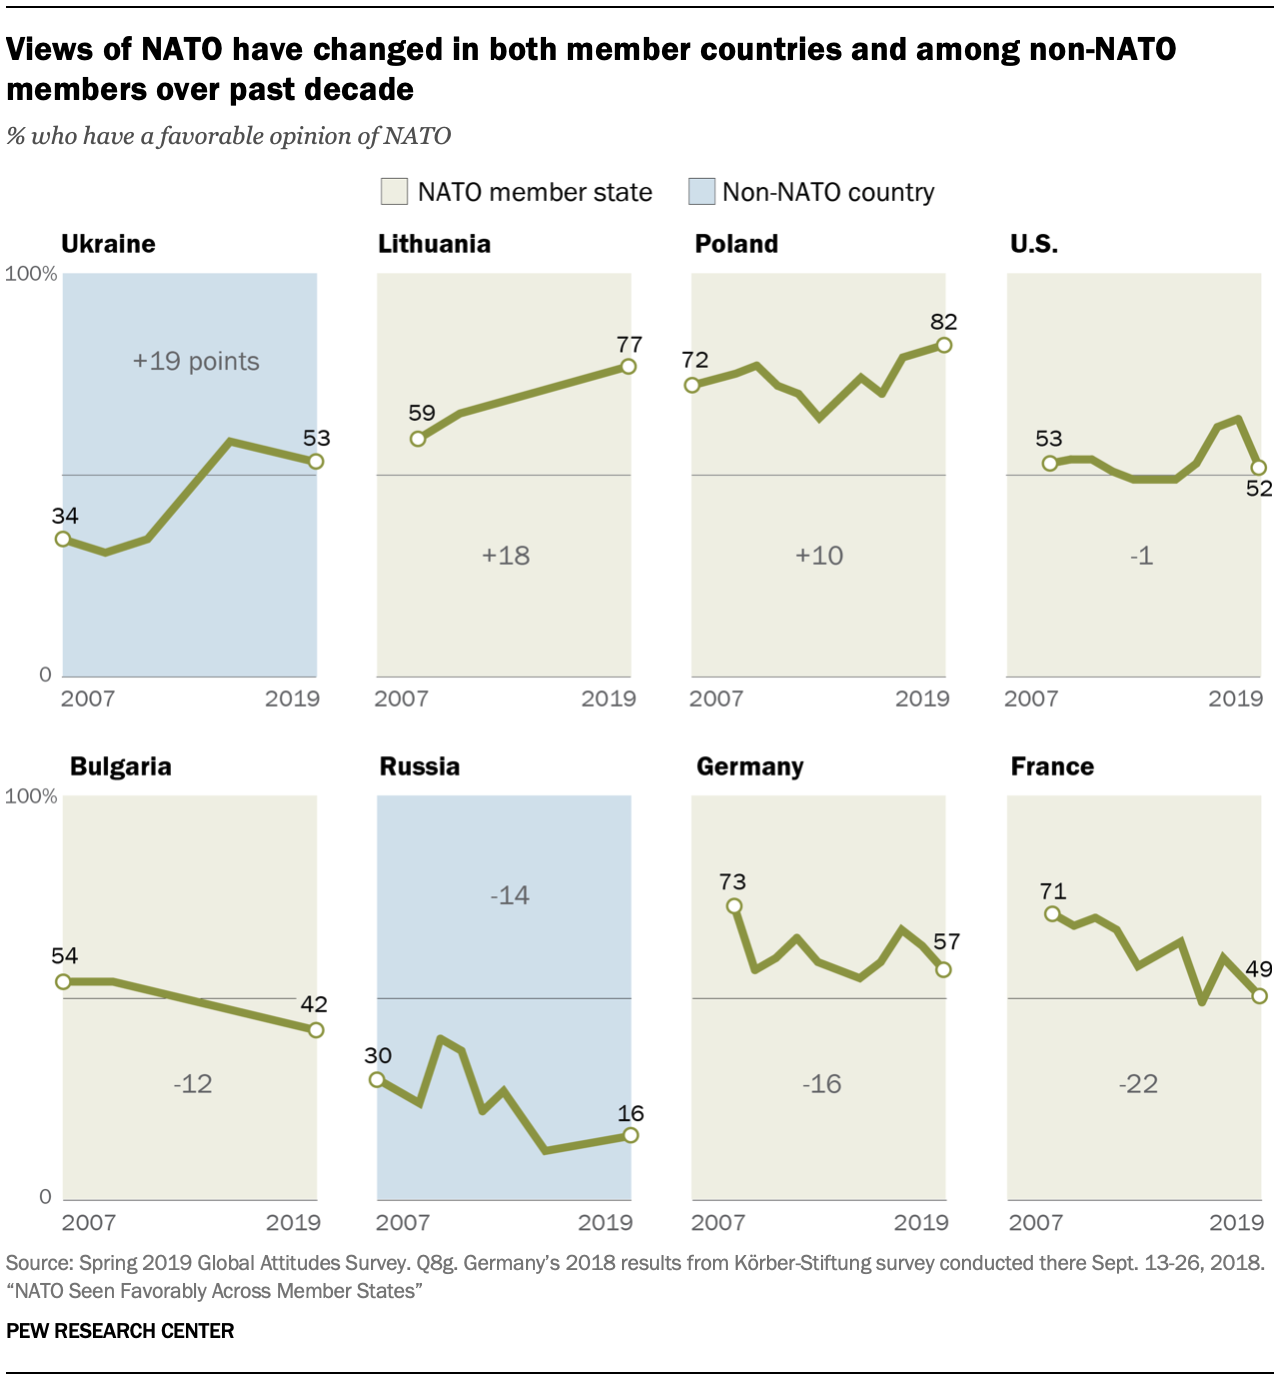 A chart showing views of NATO have changed in both member countries and among non-NATO members over past decade